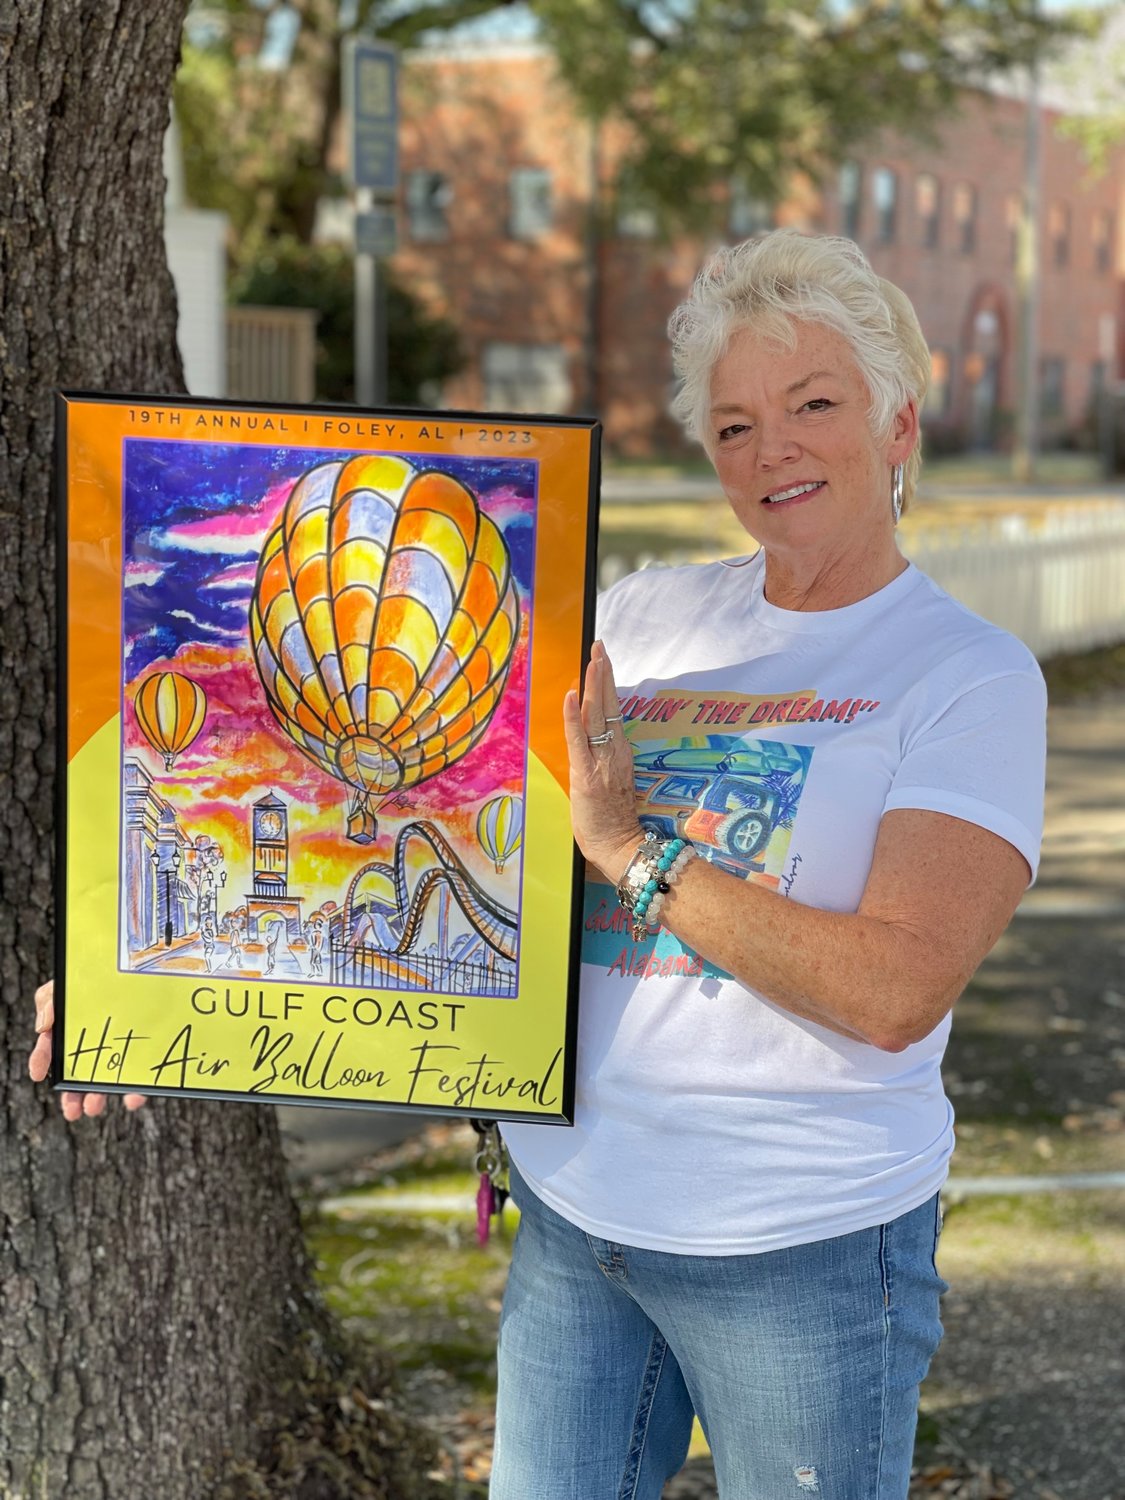 Ragan Windsor of Summerdale is a retired art educator and runs an online art gallery that displays both her art and that of other emerging artists.